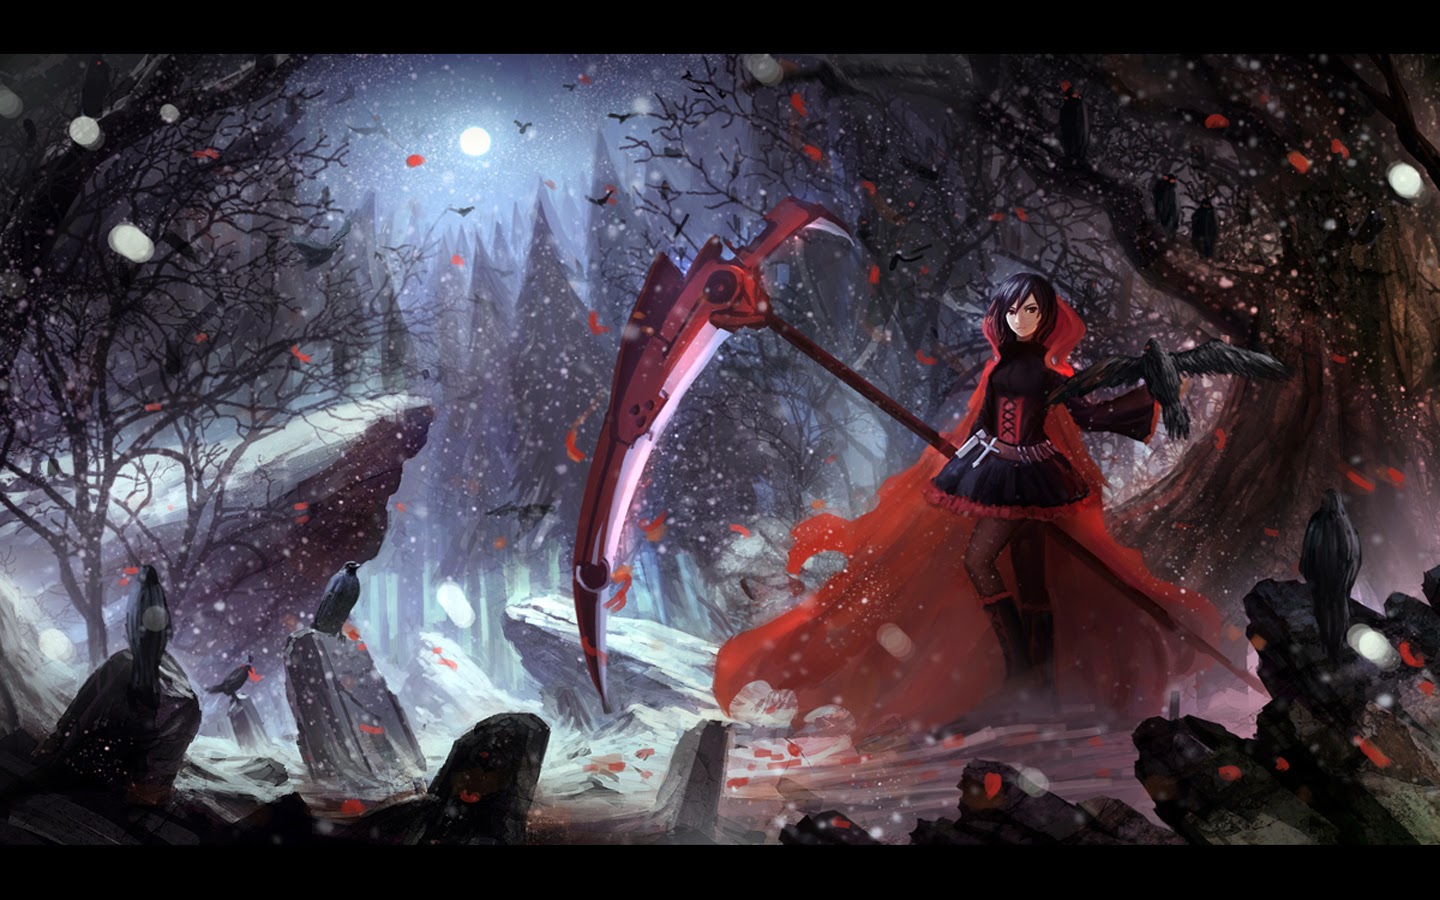 Ruby Rose Rwby High Caliber Sniper Scythe Weapon Night Snowing Forest